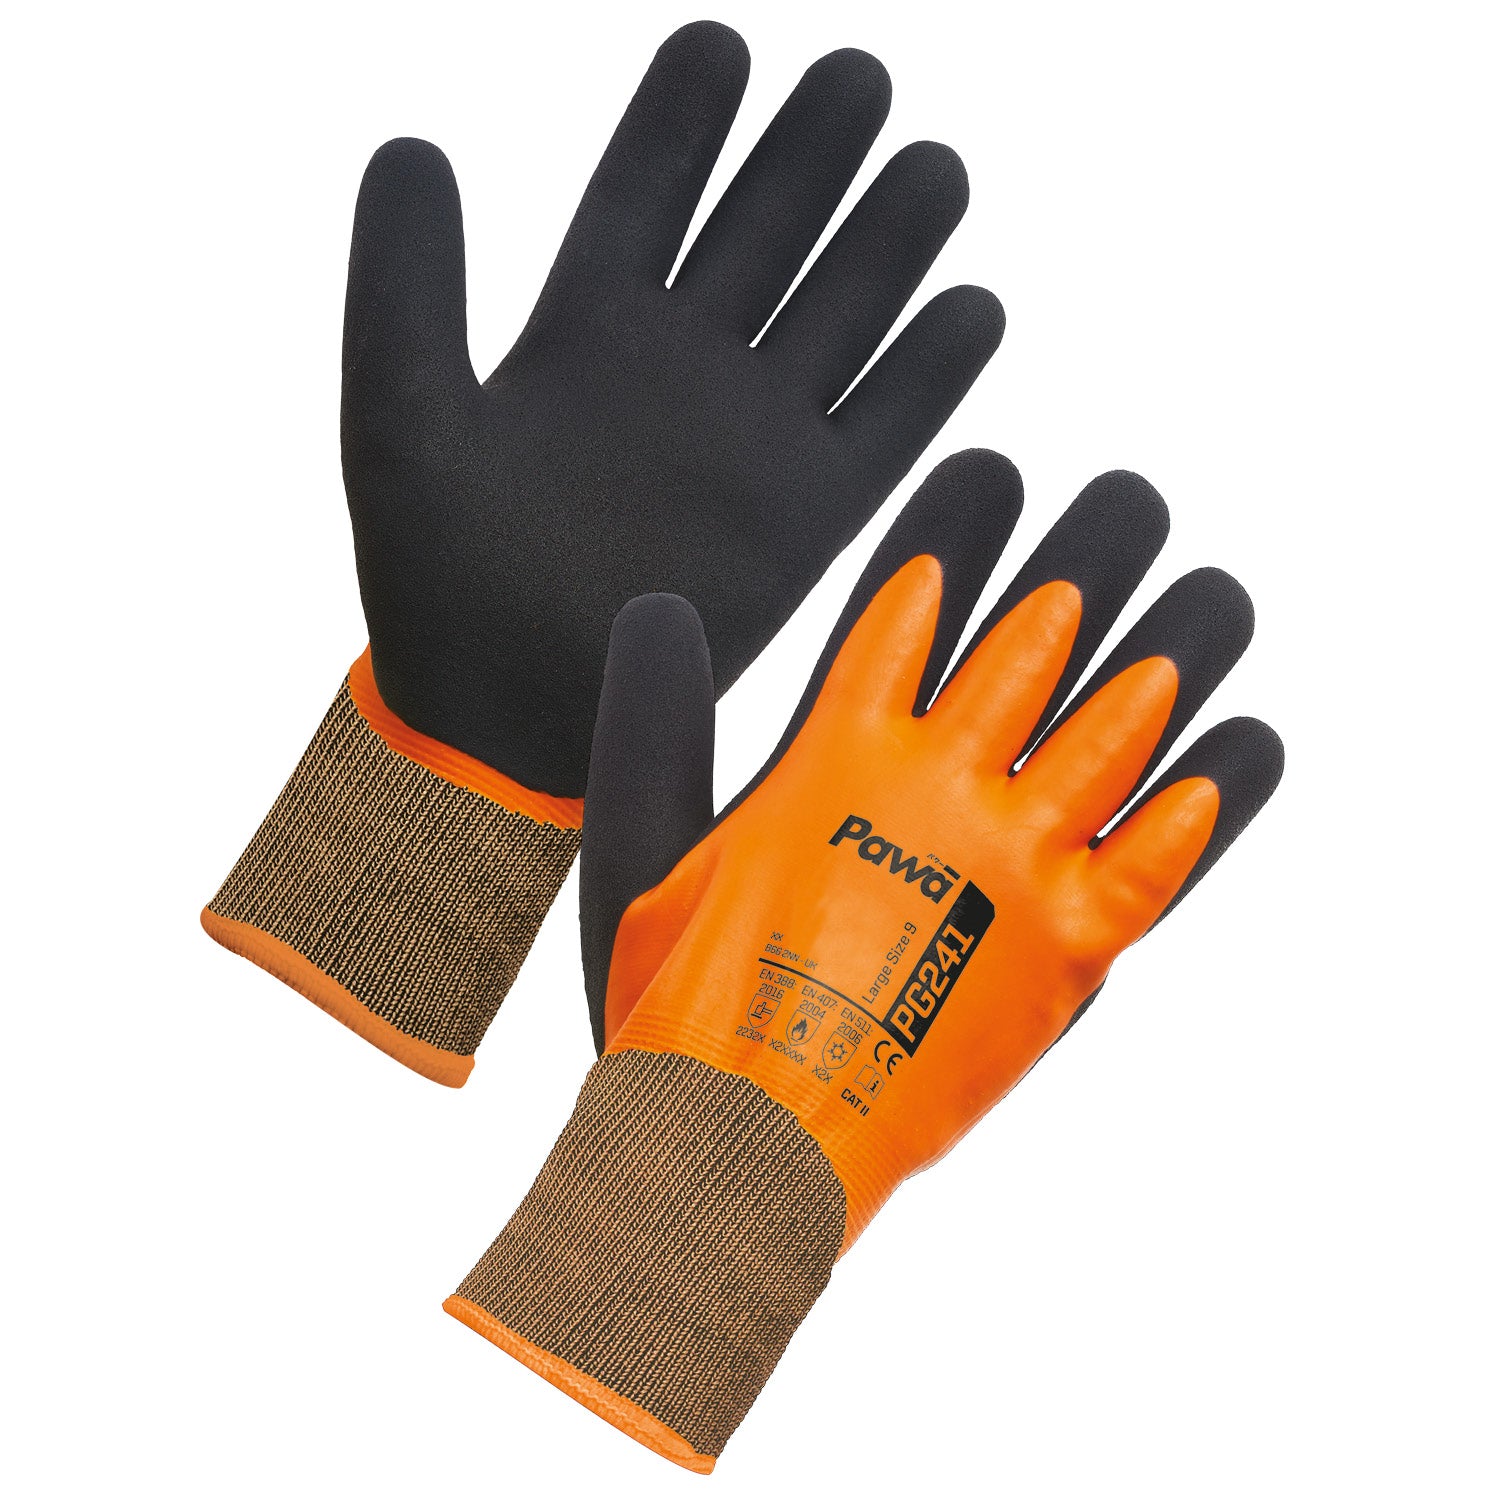 Supertouch Pawa PG241 Gloves